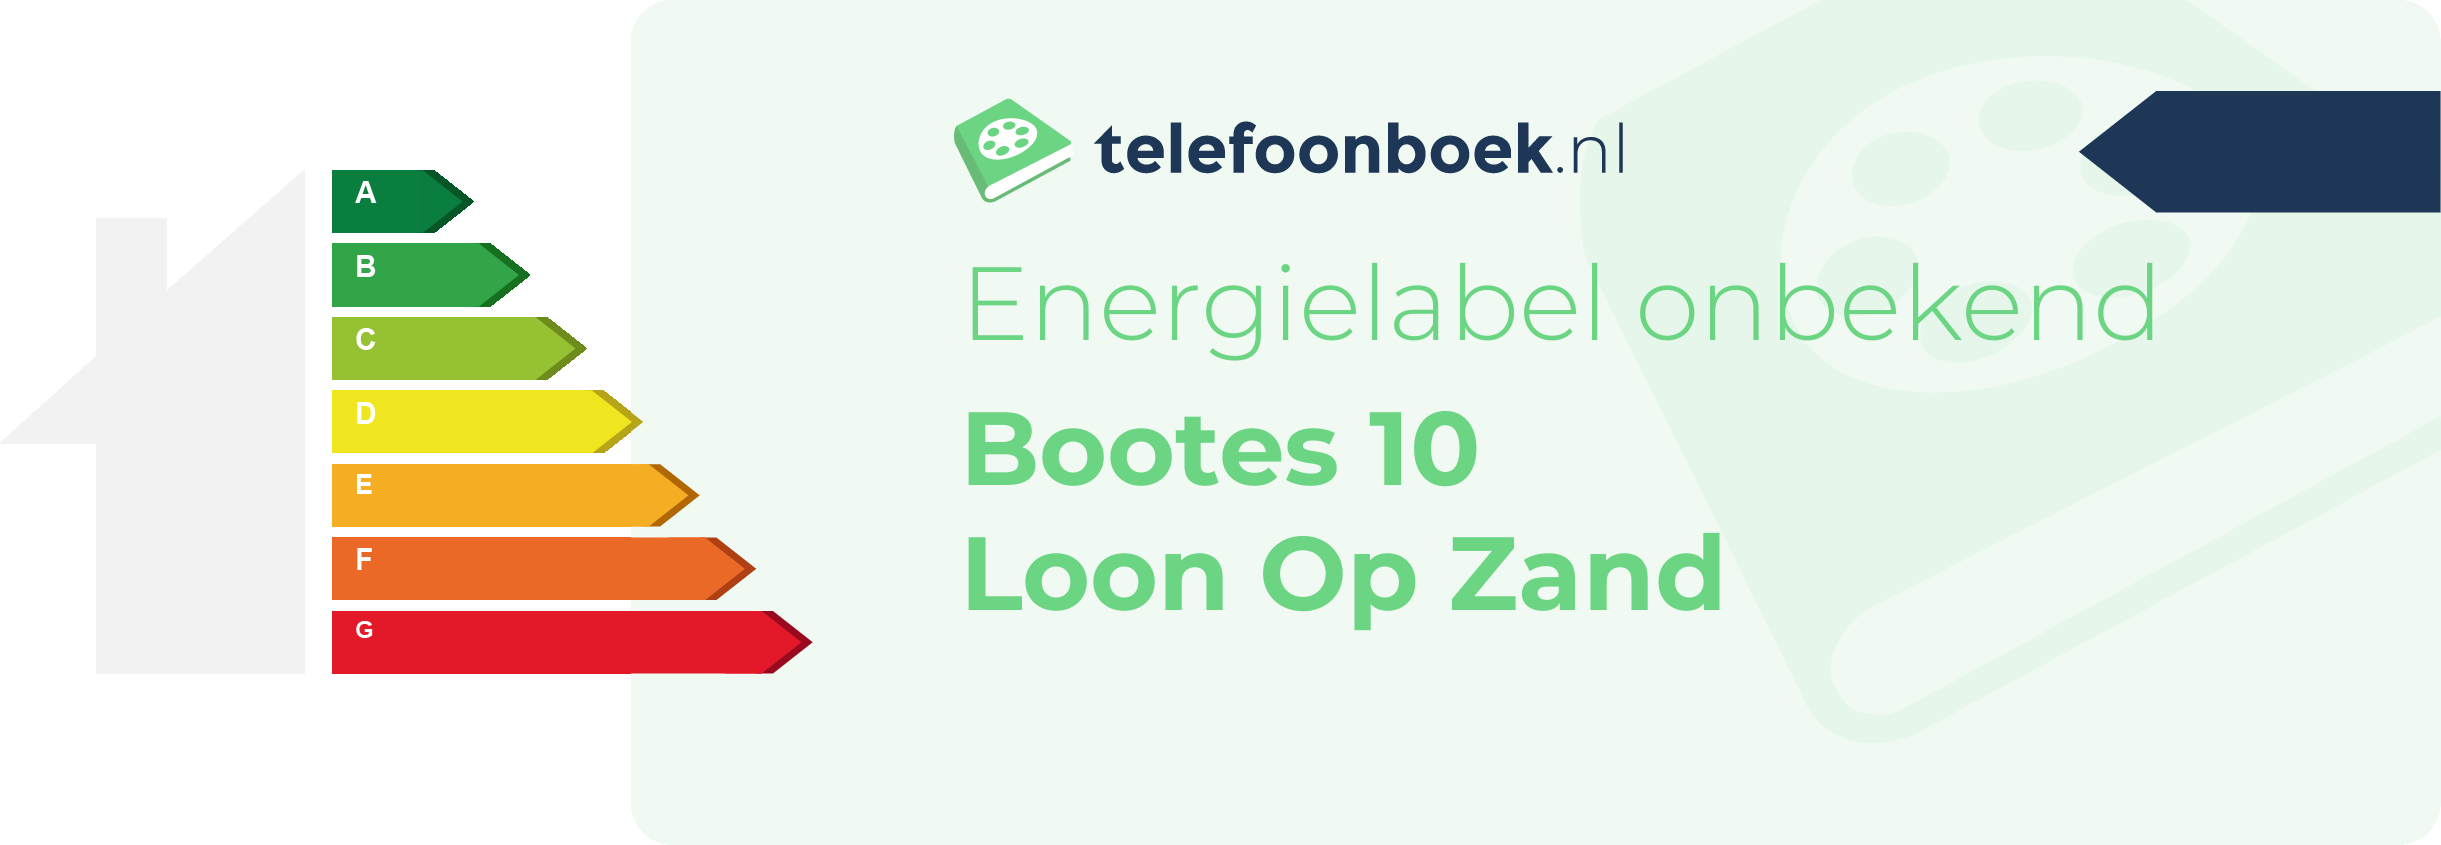 Energielabel Bootes 10 Loon Op Zand